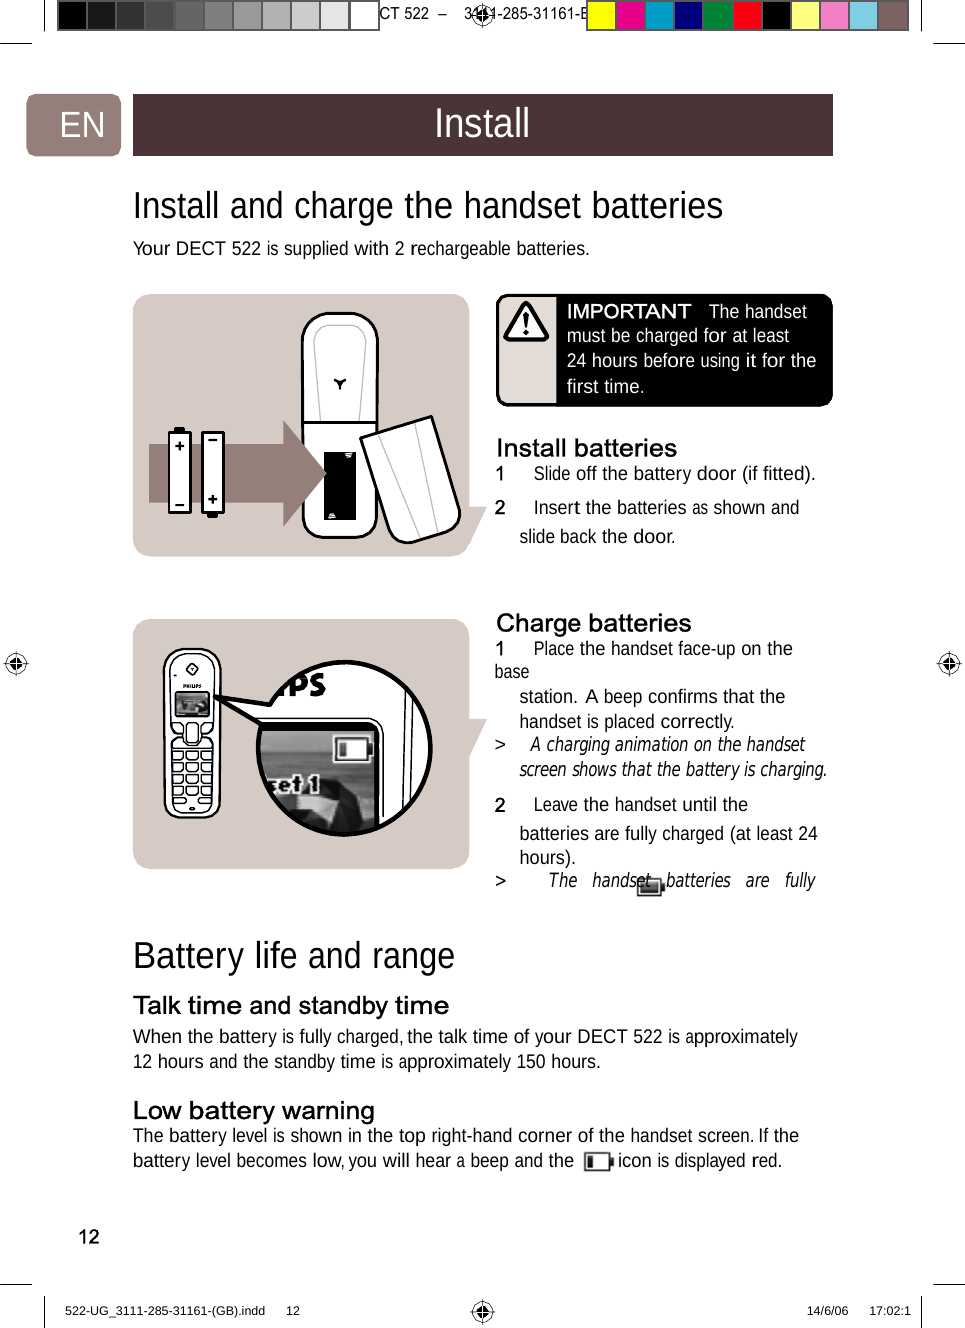 7471 – hilips DEB) –1 14.06.06CT522–3111-285-31161-EN InstallInstall and chargethehandsetbatteries Your DECT 522 is supplied with2rechargeablebatteries. IMPORTANTThe handset must be charged for at least 24 hours before using it for the ﬁrst time. Install batteries1   Slide off the battery door (if ﬁtted). 2   Insert the batteries as shown and slide backthedoor.Chargebatteries1   Place the handset face-up on the base station. A beep conﬁrms that the handset is placed correctly. &gt;   A charging animation on the handset screen shows that the battery is charging.2   Leave the handset until the batteries are fully charged (at least 24 hours). &gt;   The handset batteries are fully Batterylife and rangeTalk time and standby time When the battery is fully charged, the talk time of your DECT 522 is approximately 12 hours andthe standby timeisapproximately150hours. Low battery warning The battery level is shown in the top right-hand corner of the handset screen. If the battery level becomes low, you will hear a beep and the icon is displayed red. 12522-UG_3111-285-31161-(GB).indd    12 14/6/06   17:02:1 